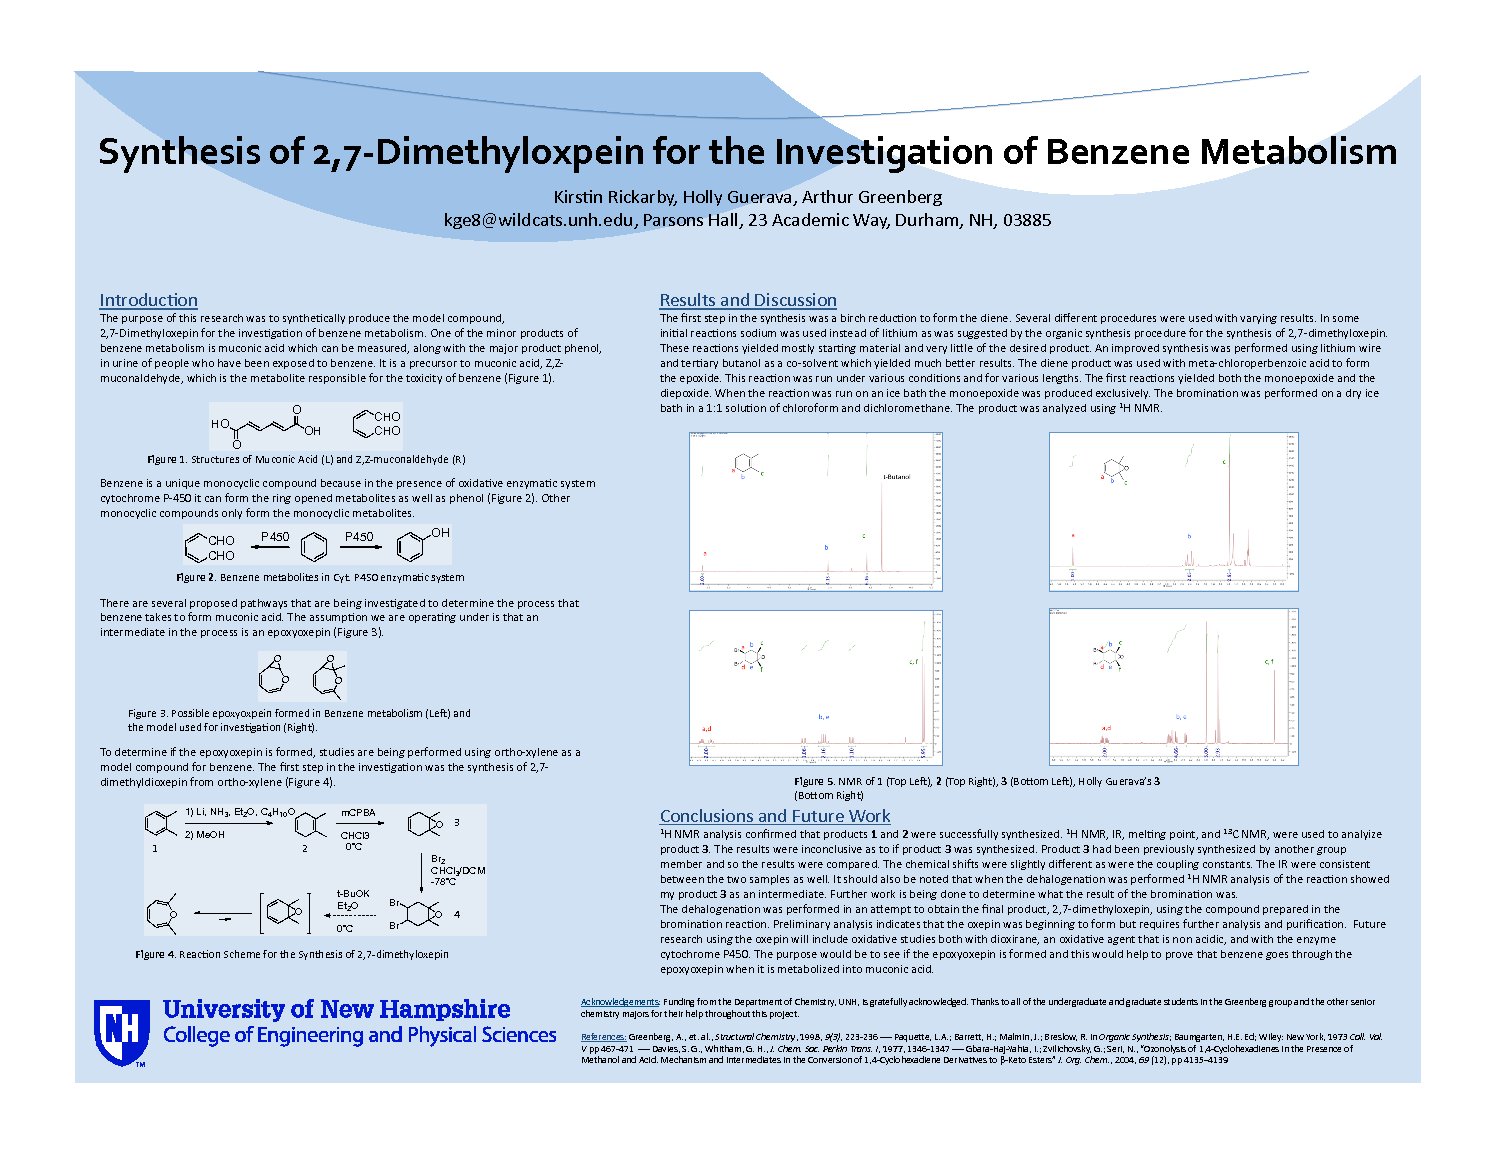 Synthesis Of 2,7-Dimethyloxepin For The Investigation Of Benzene Metabolism by kge8